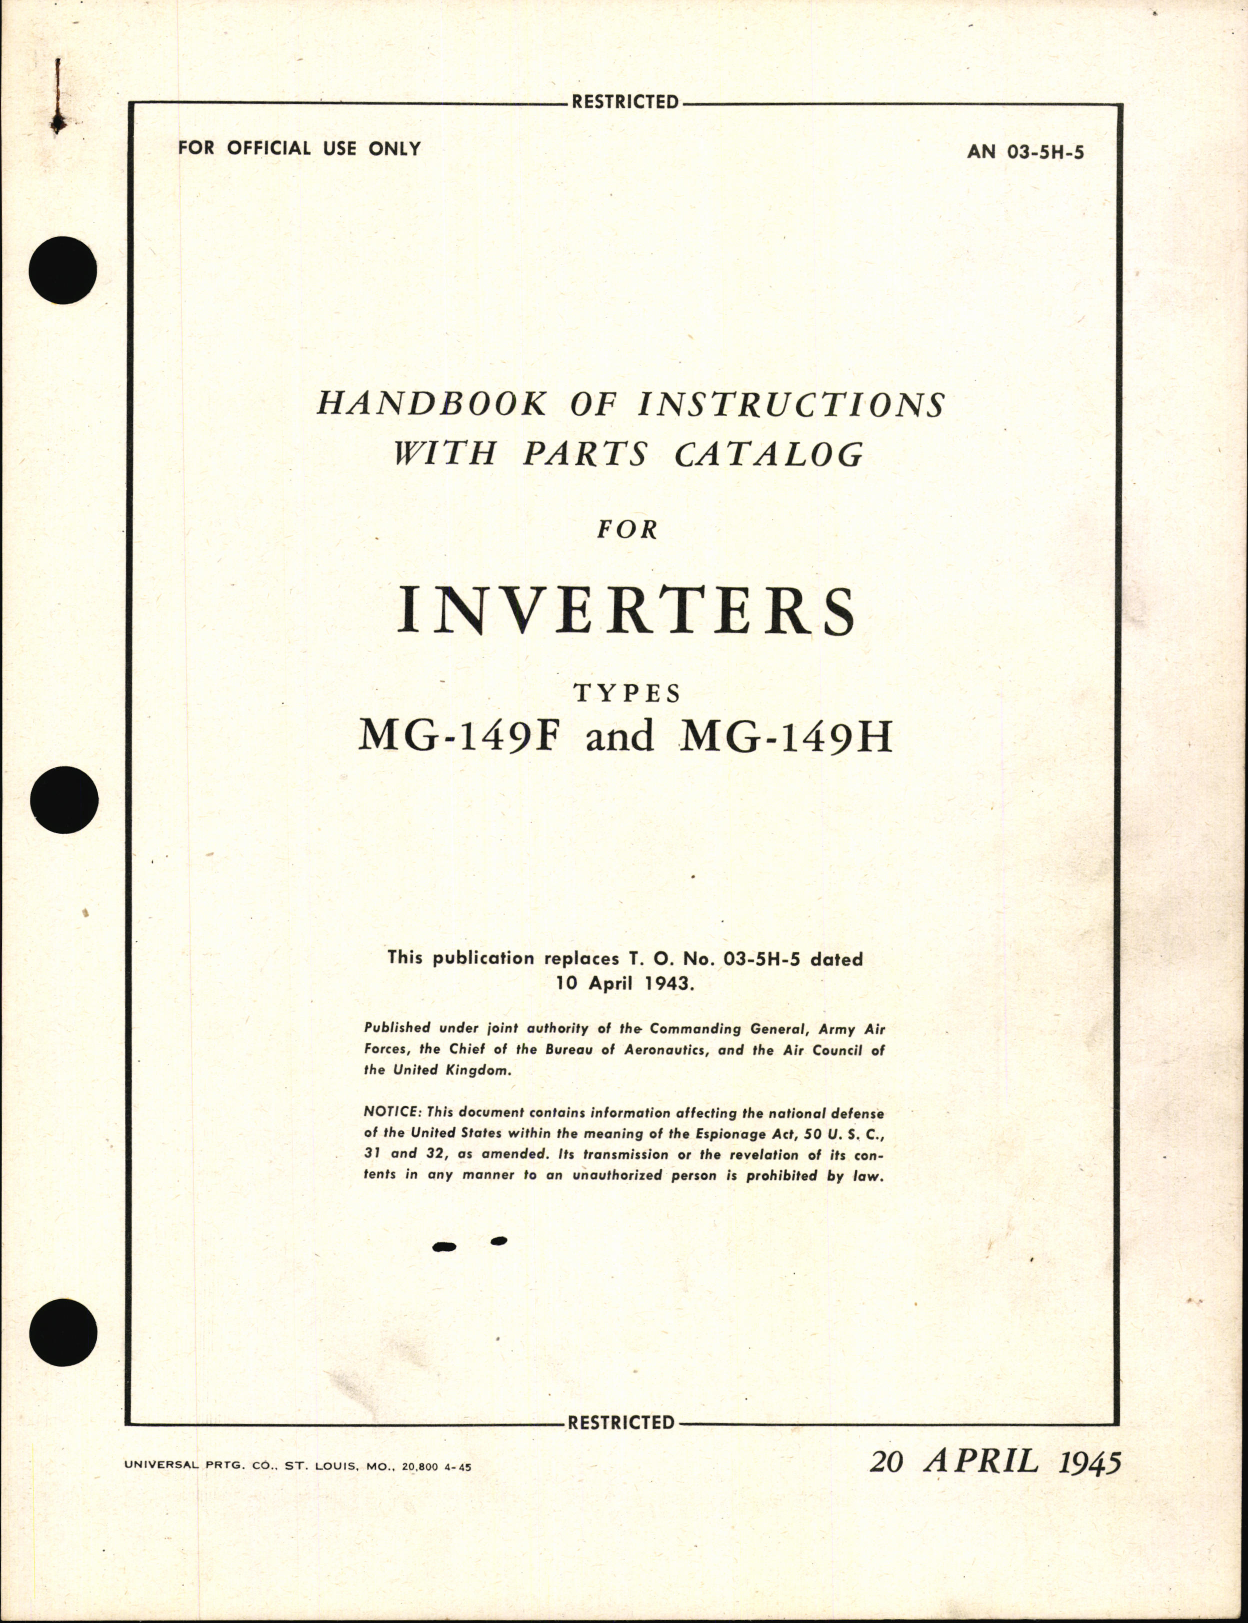 Sample page 1 from AirCorps Library document: Handbook of Instructions with Parts Catalog for Inverters, Types MG-149F and MG-149H